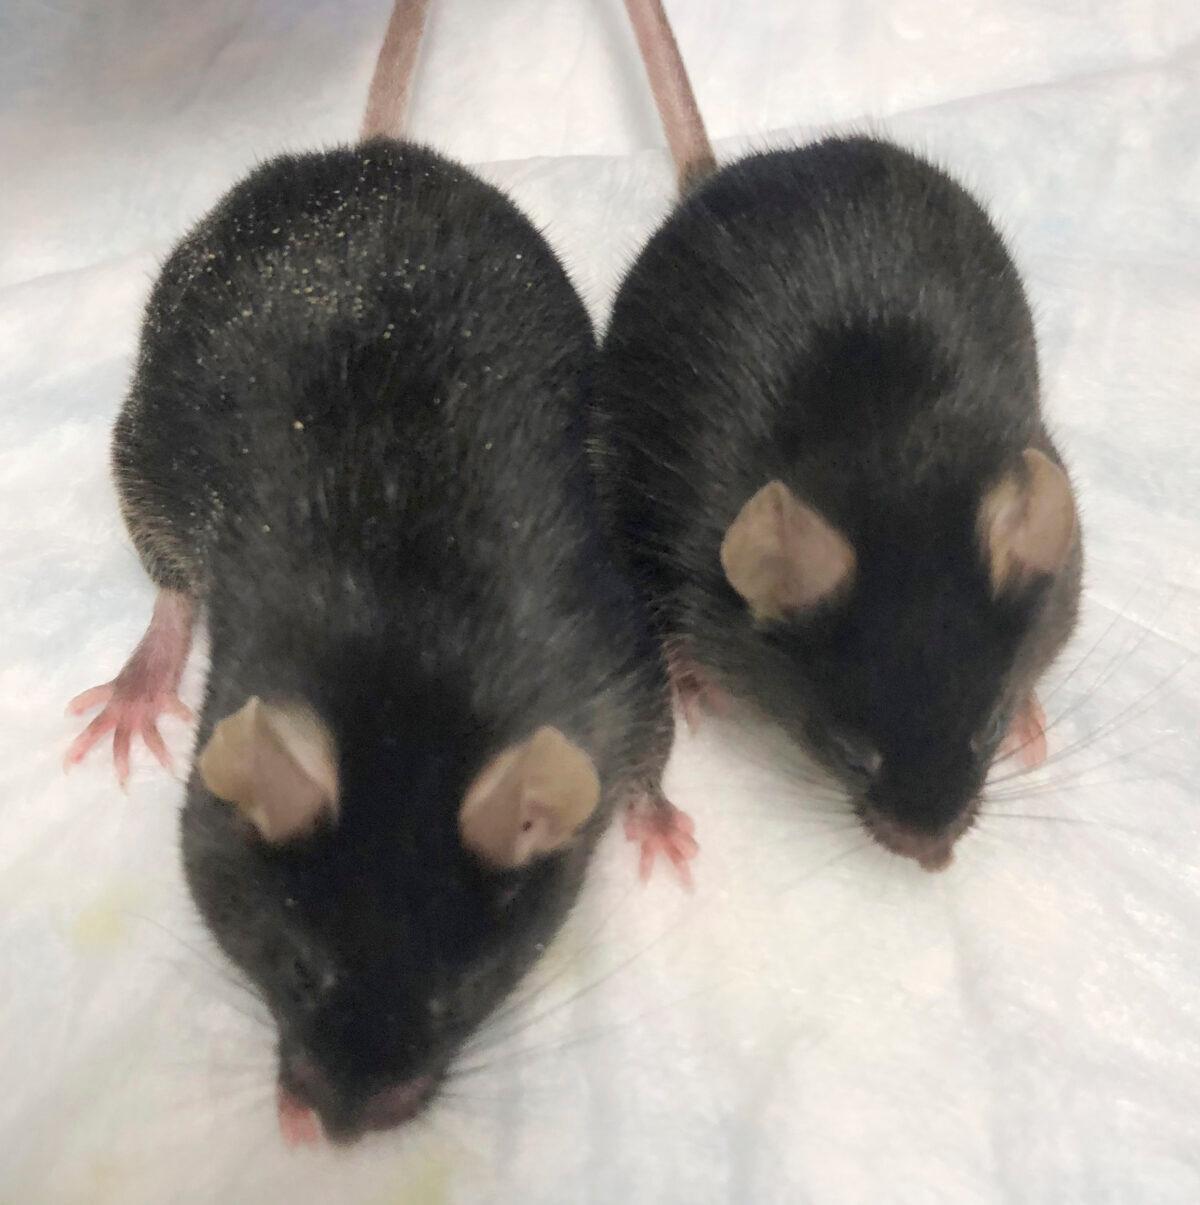 A normal mouse and a “twice-muscled” mouse developed at the The Jackson Laboratory of the University of Connecticut School of Medicine in Farmington, Conn., in August 2020. (Dr. Se-Jin Lee/University of Connecticut School of Medicine via AP)